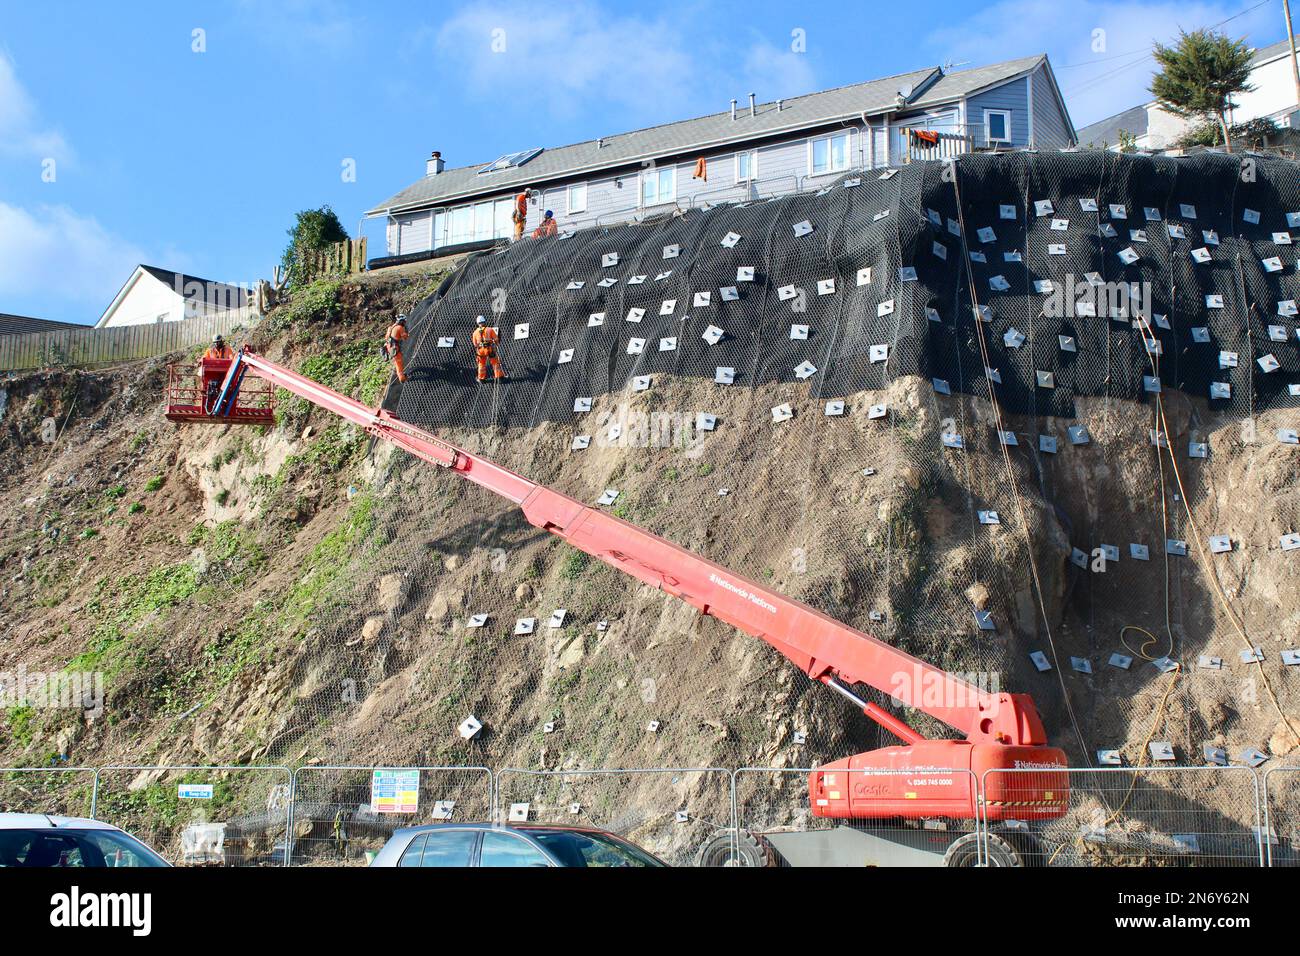 Cliff stabilisation work at the Quarry lane car park in Falmouth, Cornwall, England. Abseiling workers carry out essential work. Stock Photo